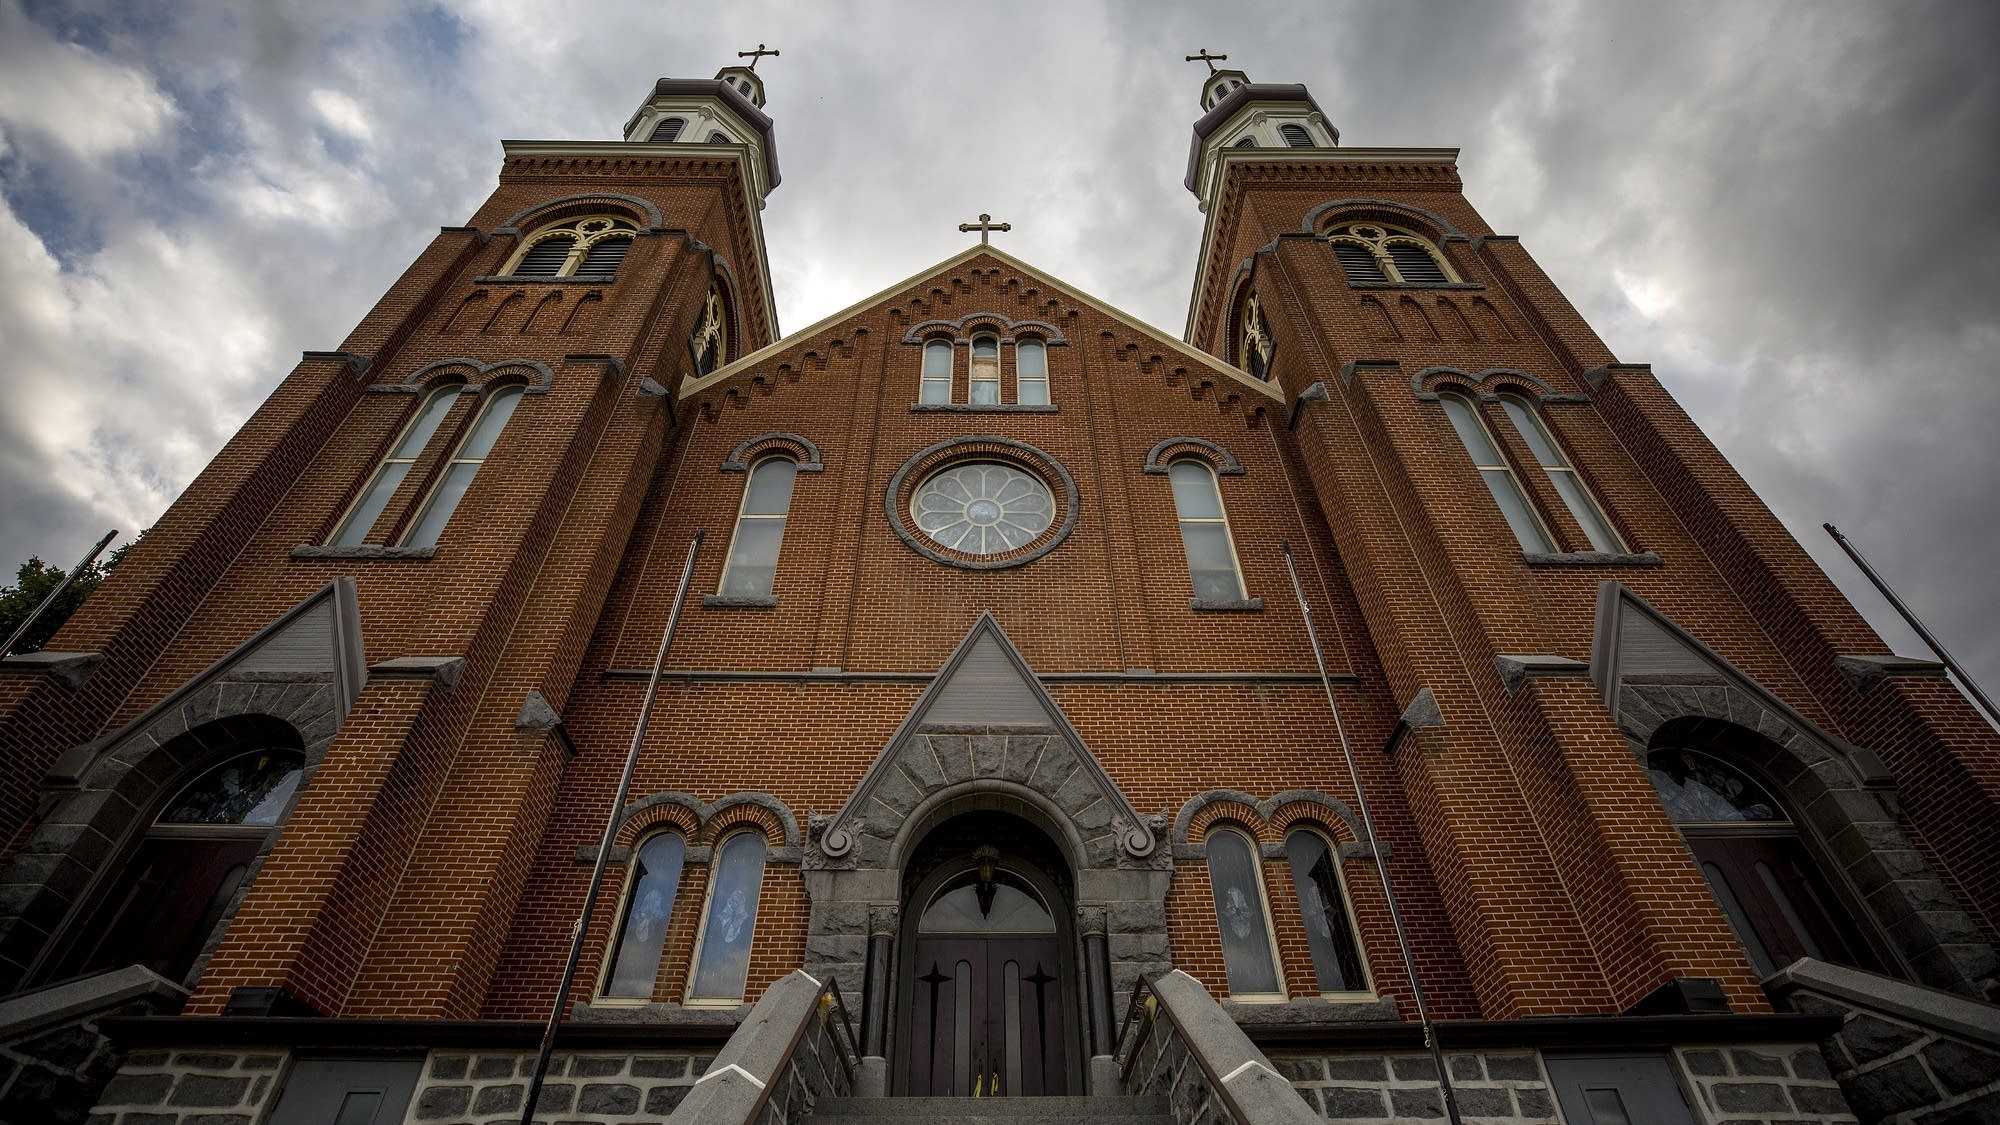 Fate of historic church divides parish members in central Minnesota ...